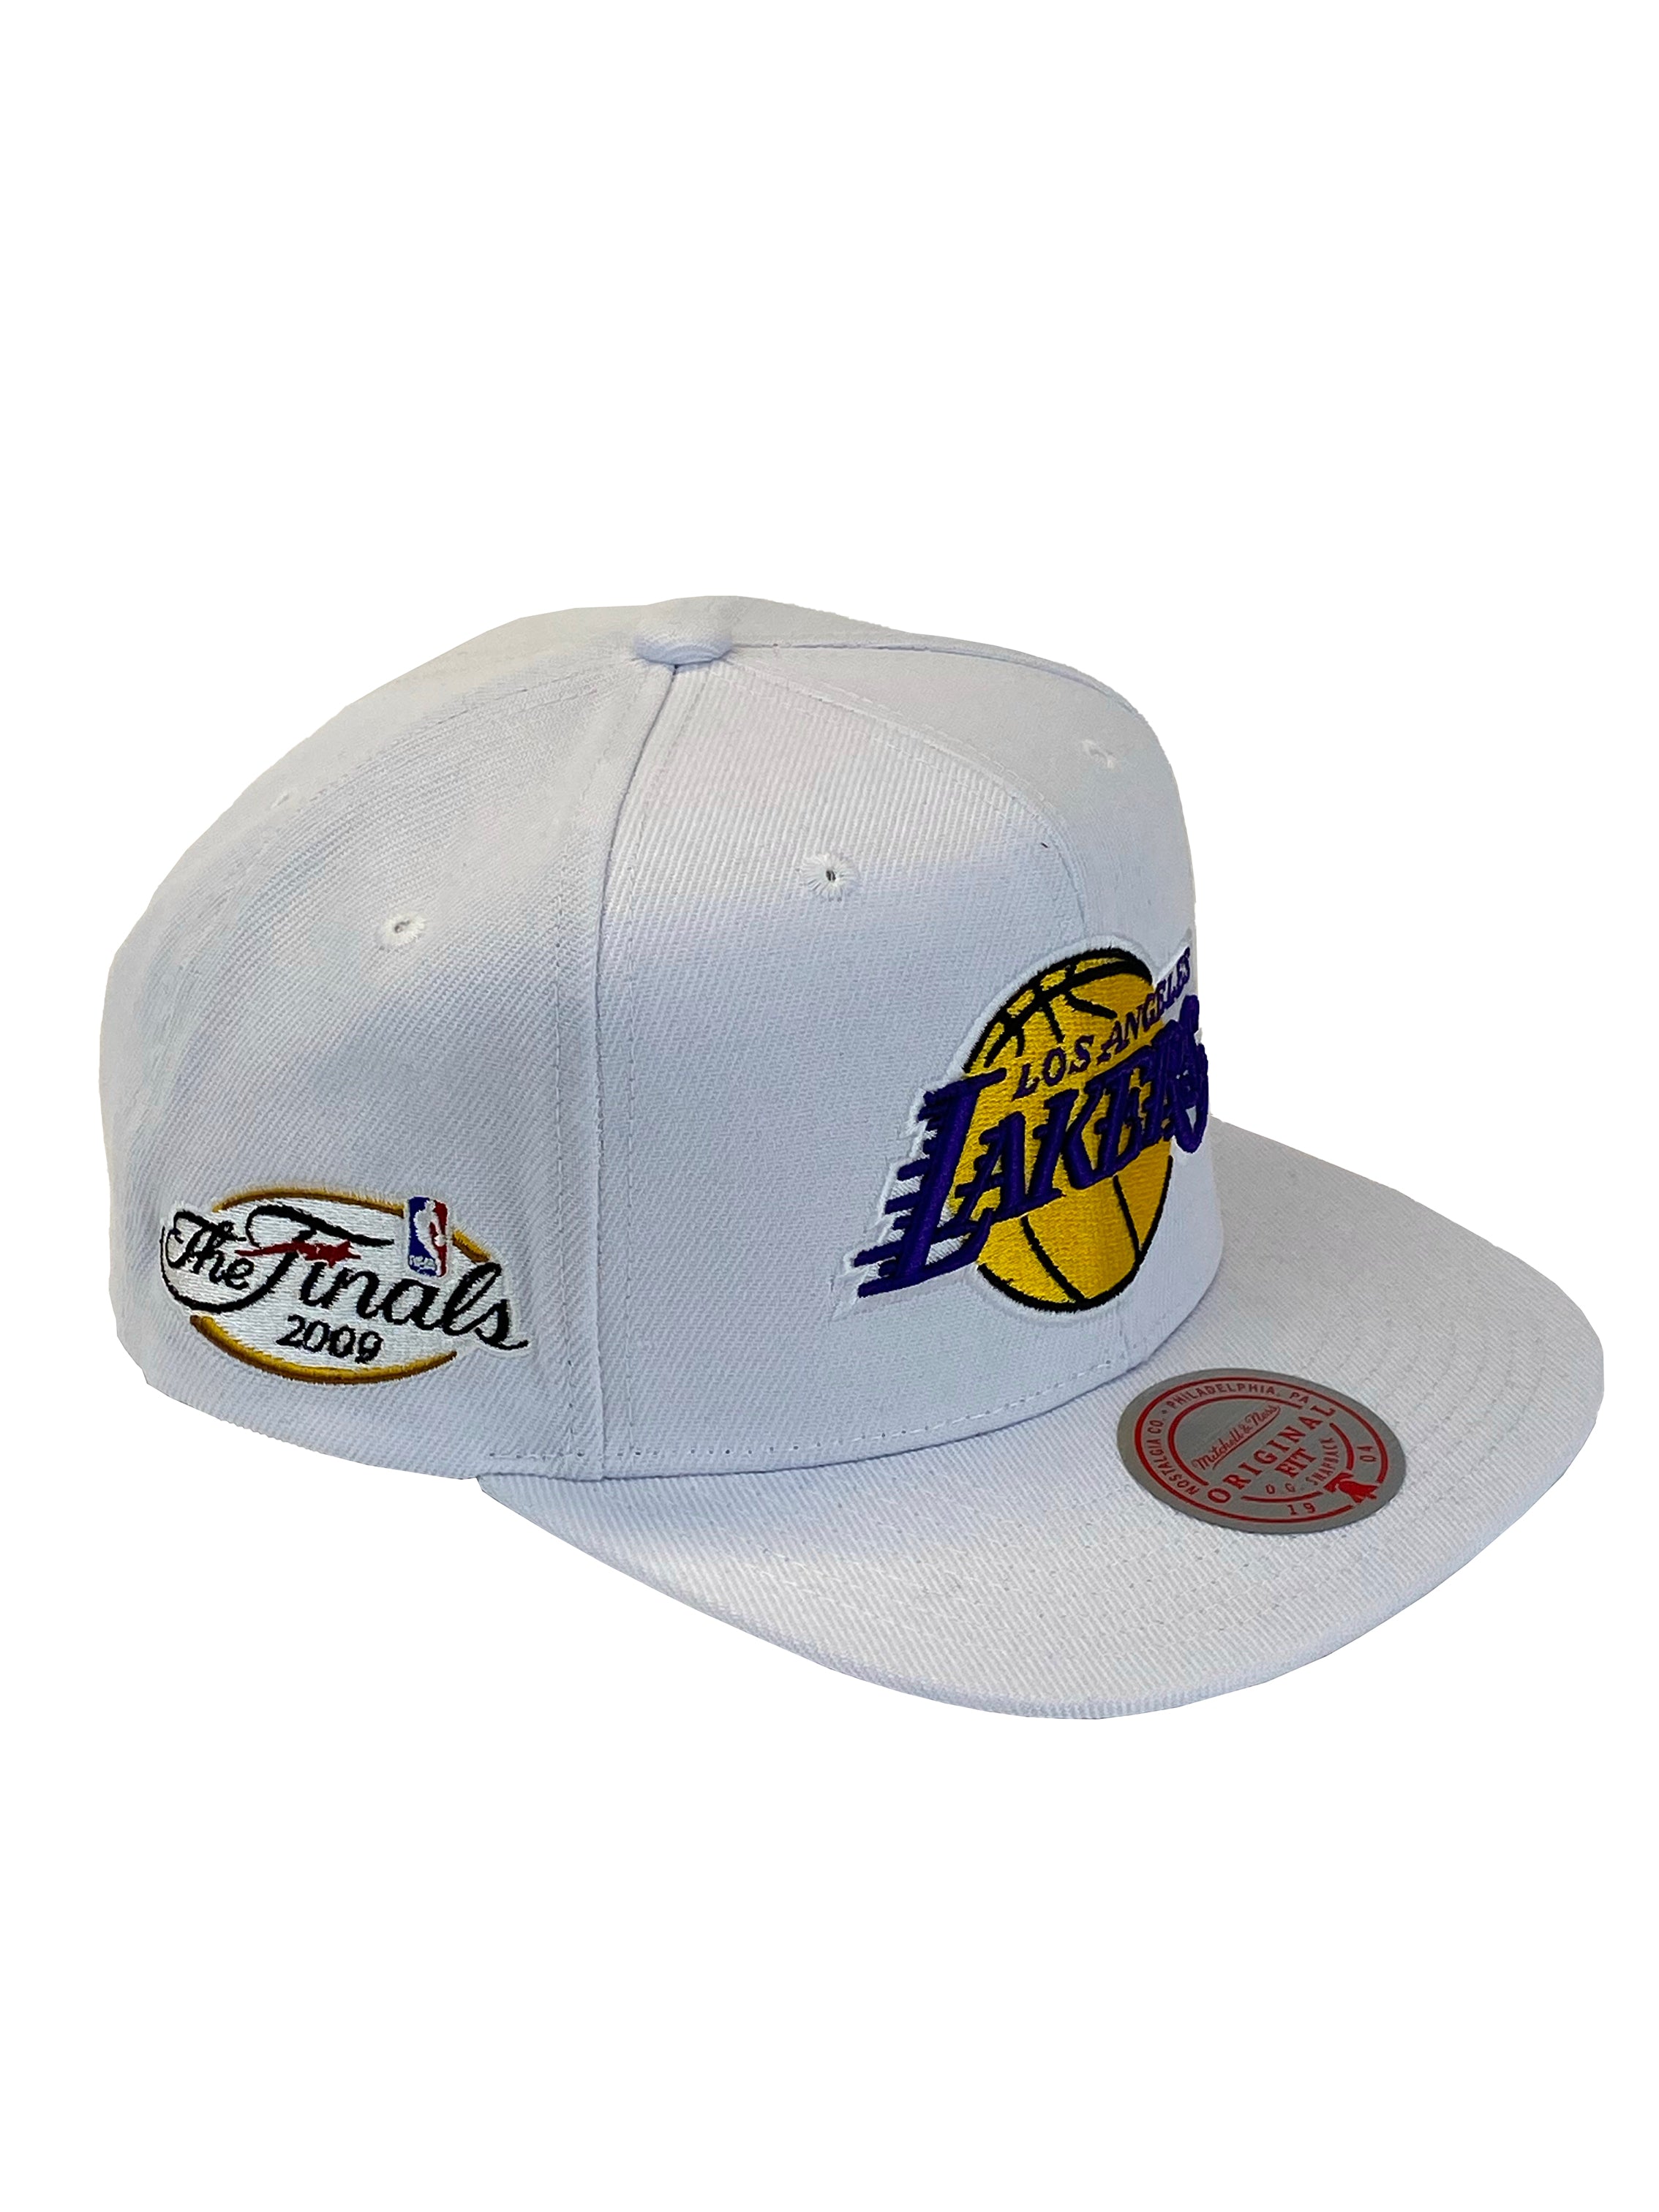 LOS ANGELES LAKERS 2009 FINALS PATCH SNAPBACK – JR'S SPORTS